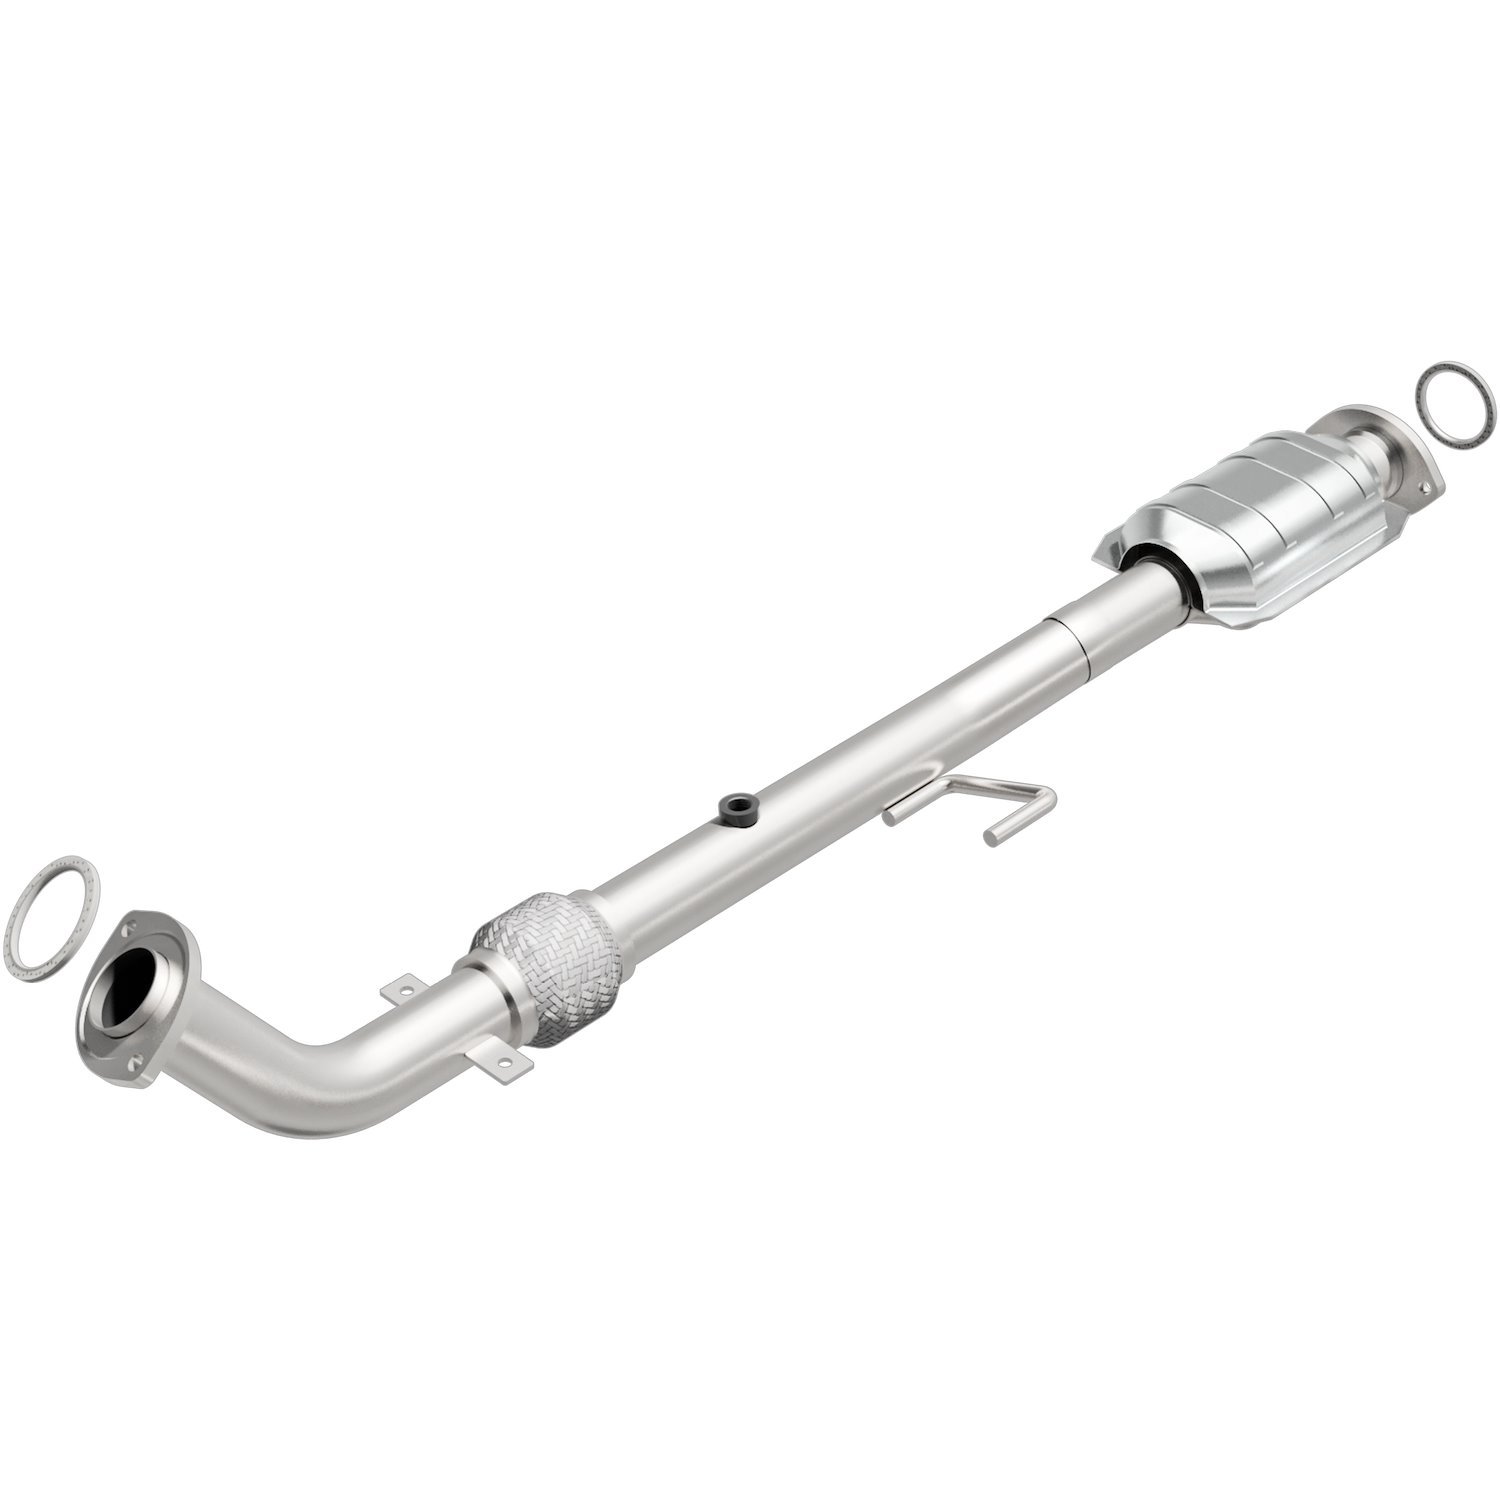 OEM Grade Federal / EPA Compliant Direct-Fit Catalytic Converter 49556